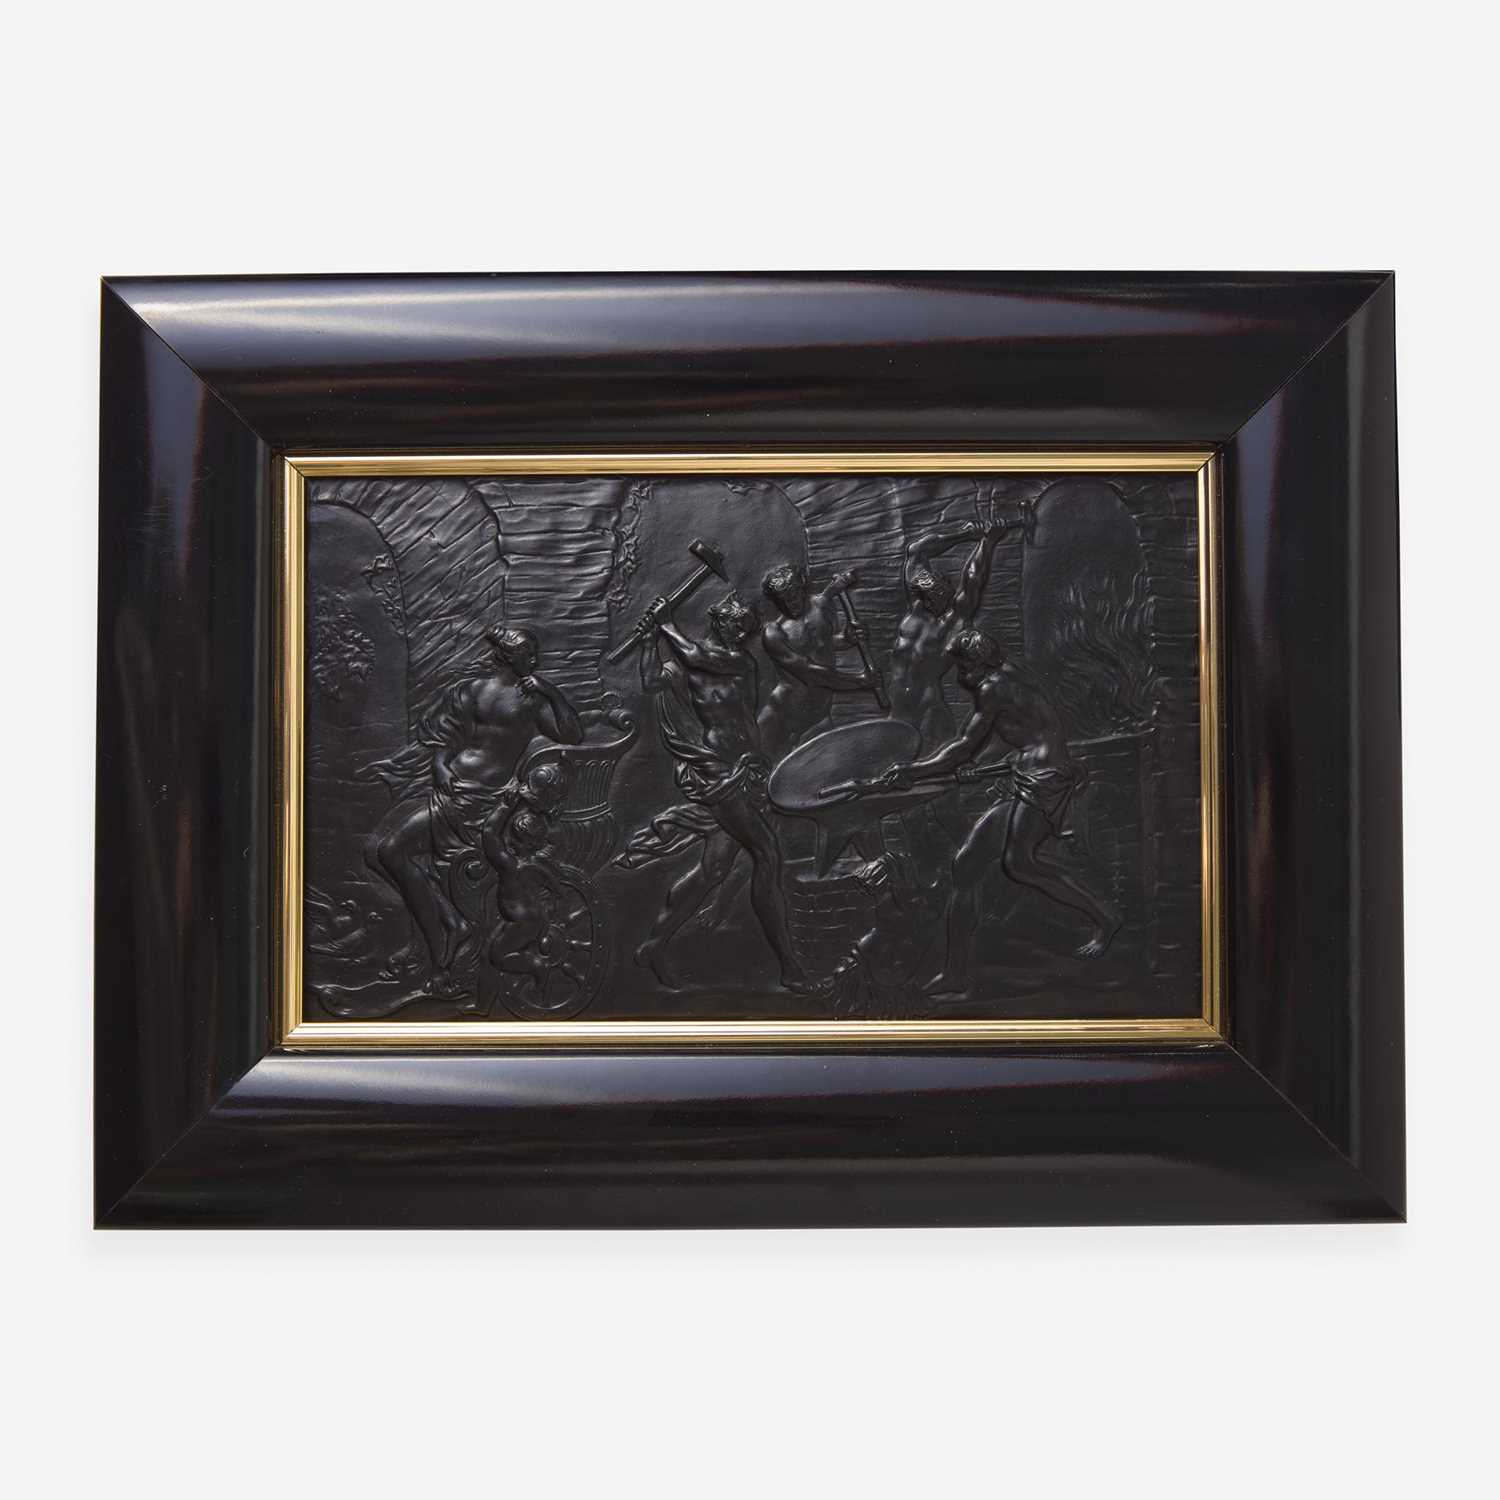 Lot 49 - A Wedgwood Black Basalt "Vulcan Forging the Armour for Achilles at the Request of Venus" Plaque